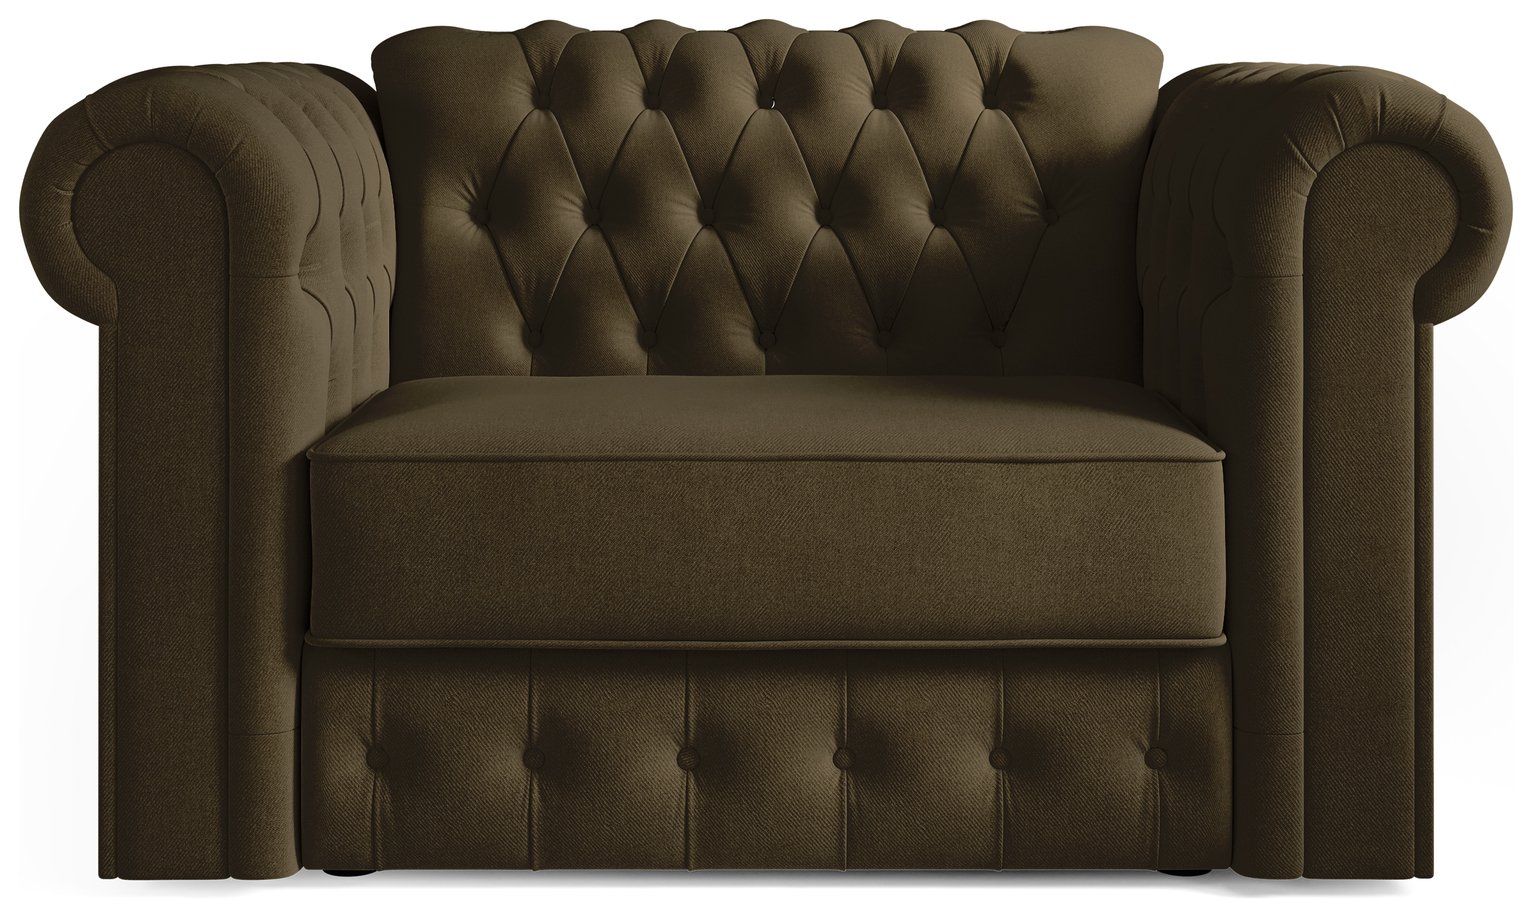 Jay-Be Chesterfield Fabric Cuddle Chair Sofa Bed -Sage Green Sage